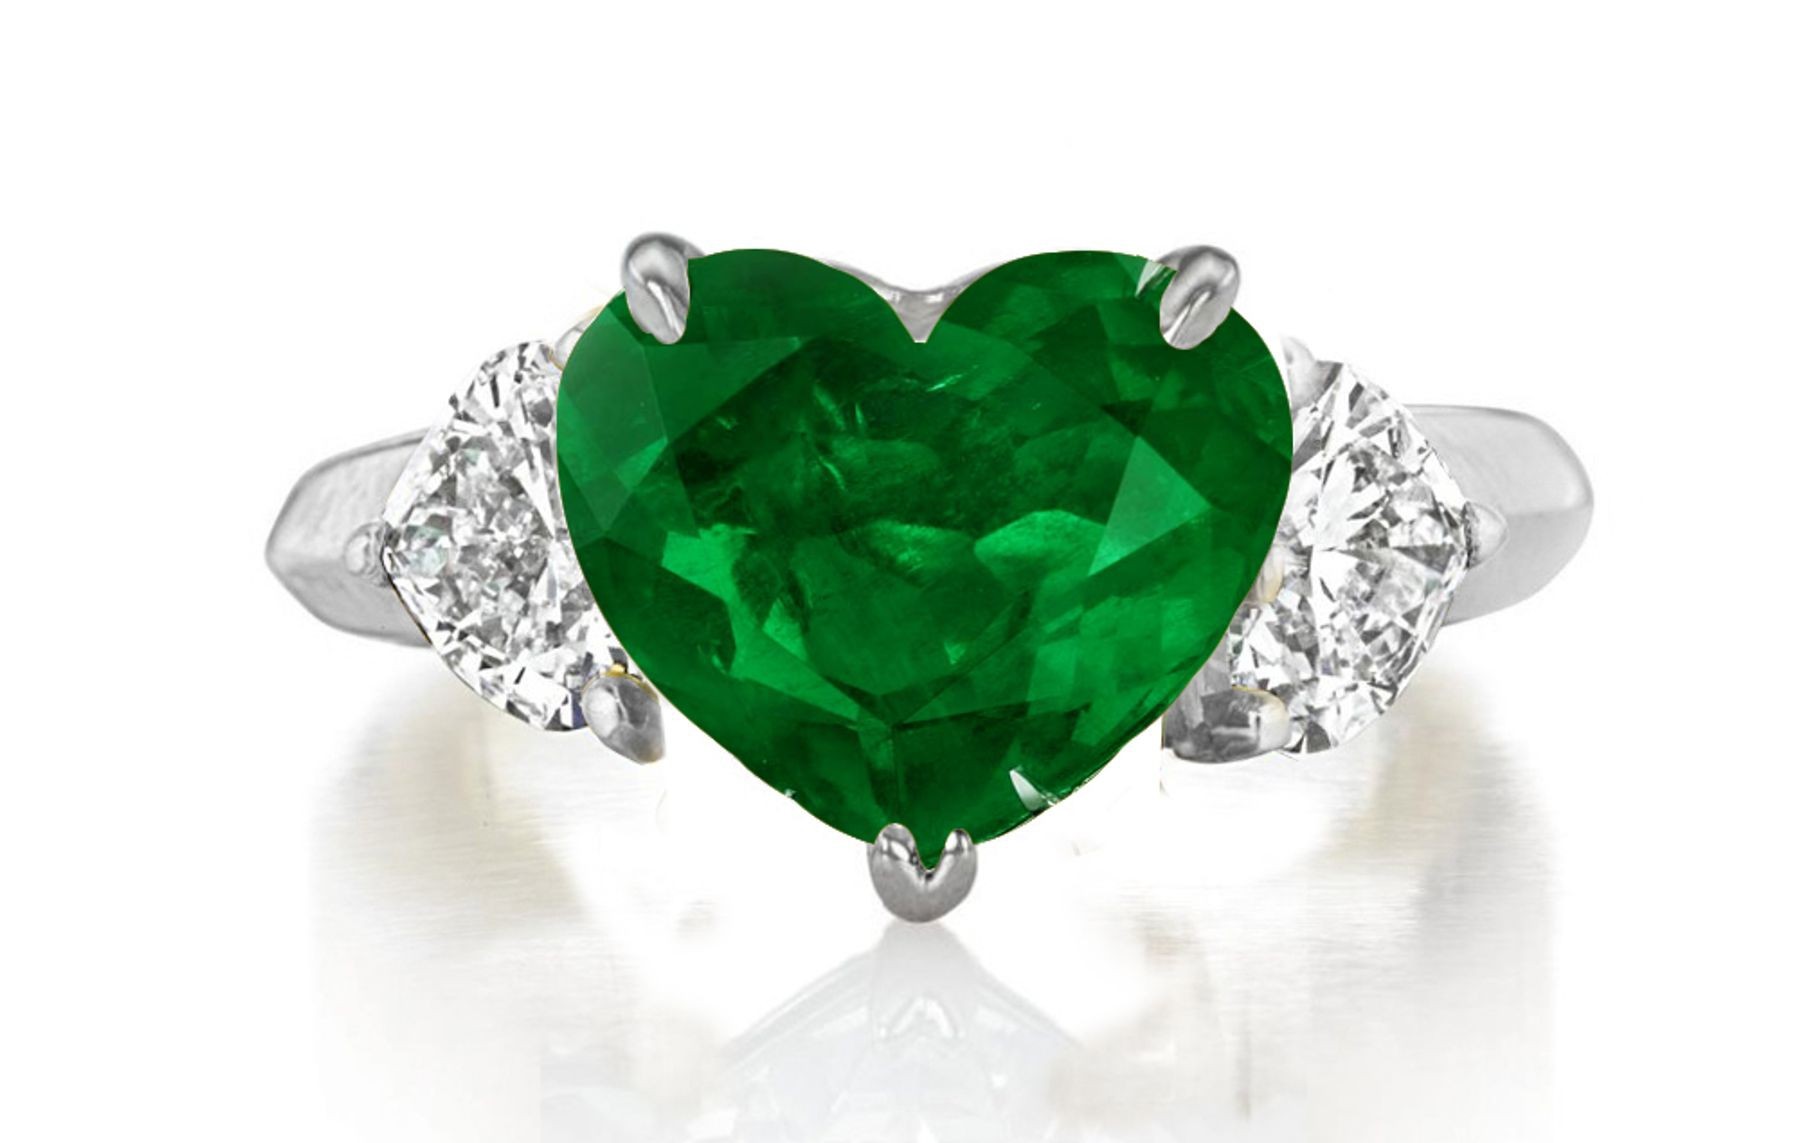 Made to Order Three Stone Rings Heart Shaped Diamonds & Emerald Rings